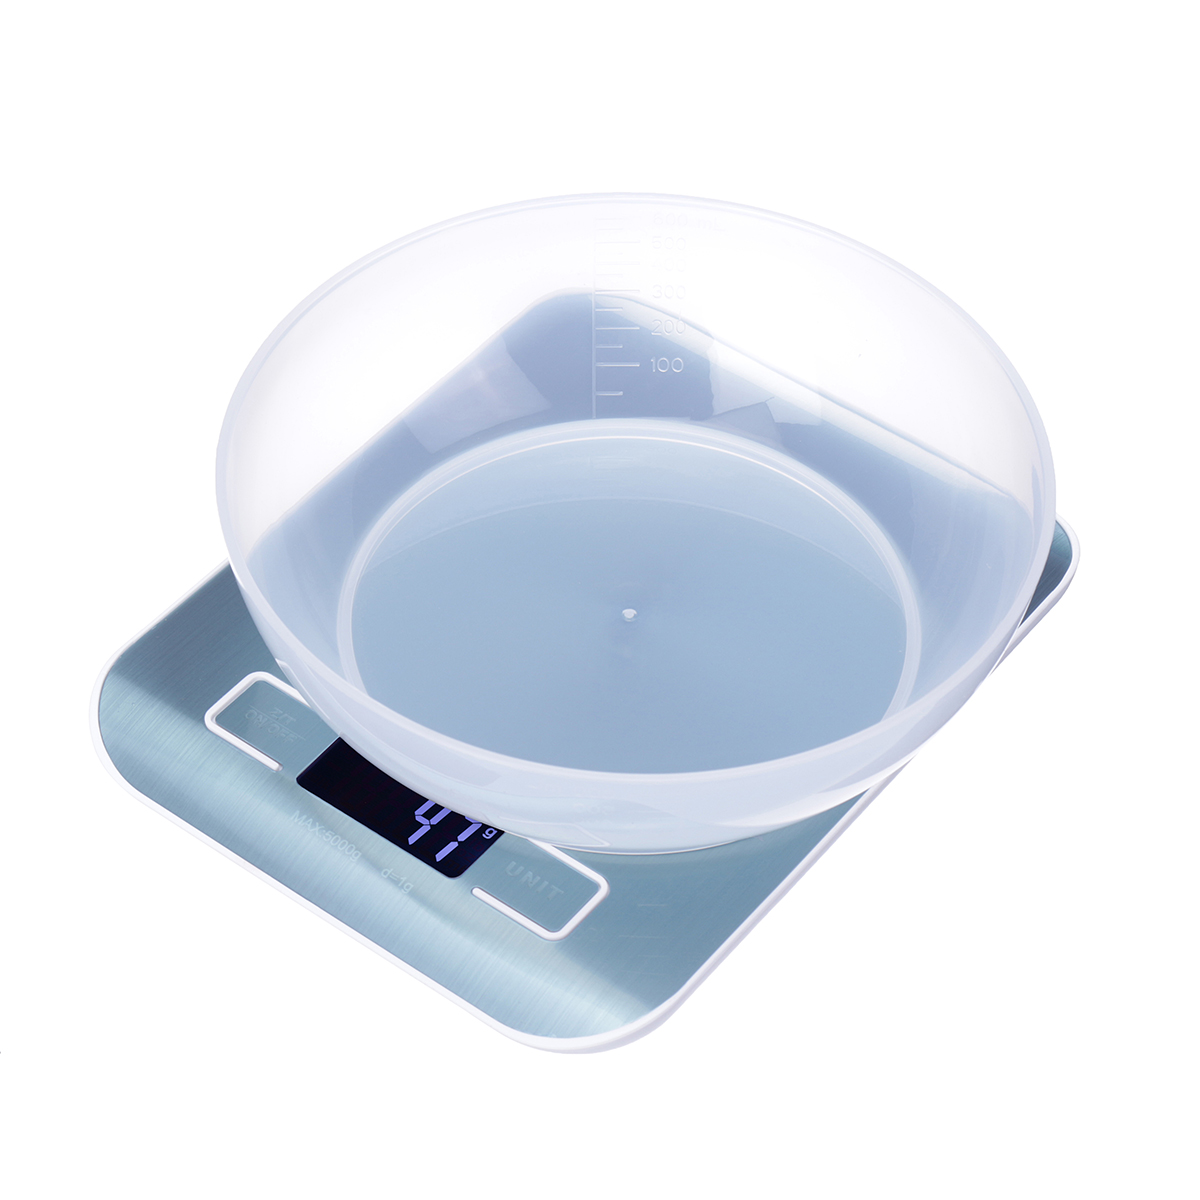 Digital-Kitchen-Scale-5kg1g-10kg1g-Food-Scale-Stainless-Steel-LCD-Display-Kitchen-Baking-Mesuring-To-1582787-6